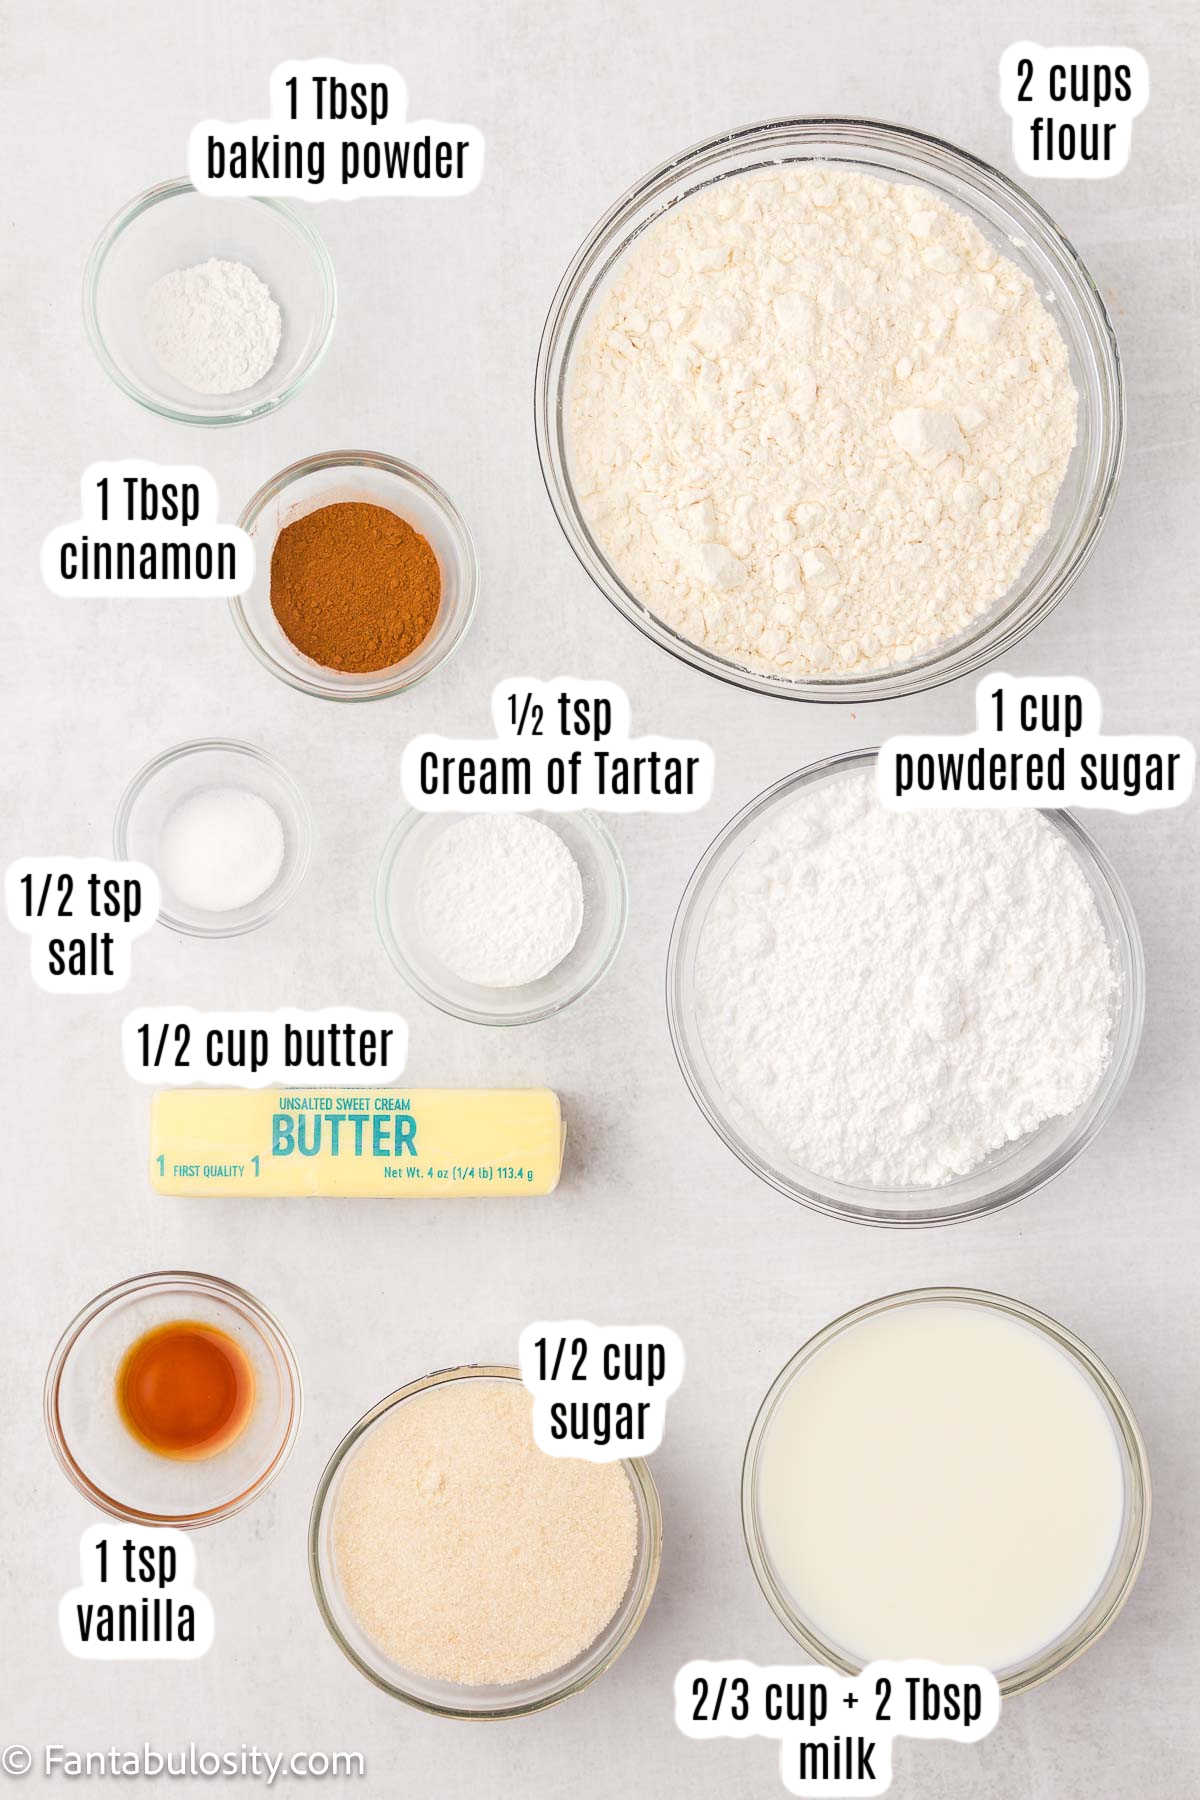 Labeled ingredients for cinnamon biscuits.